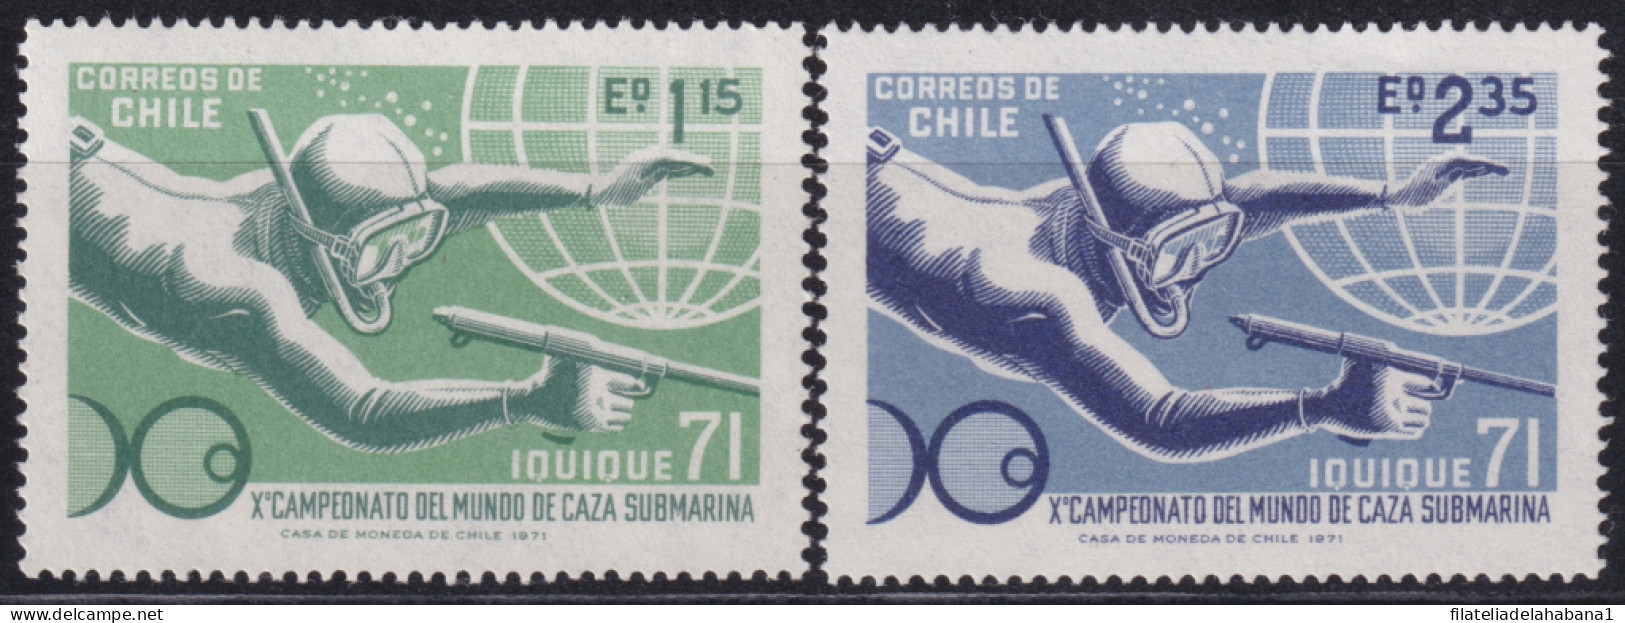 F-EX50189 CHILE MNH 1971 WORLD CHAMPIONSHIP HUNT FISHING FISH PECES.  - Buceo